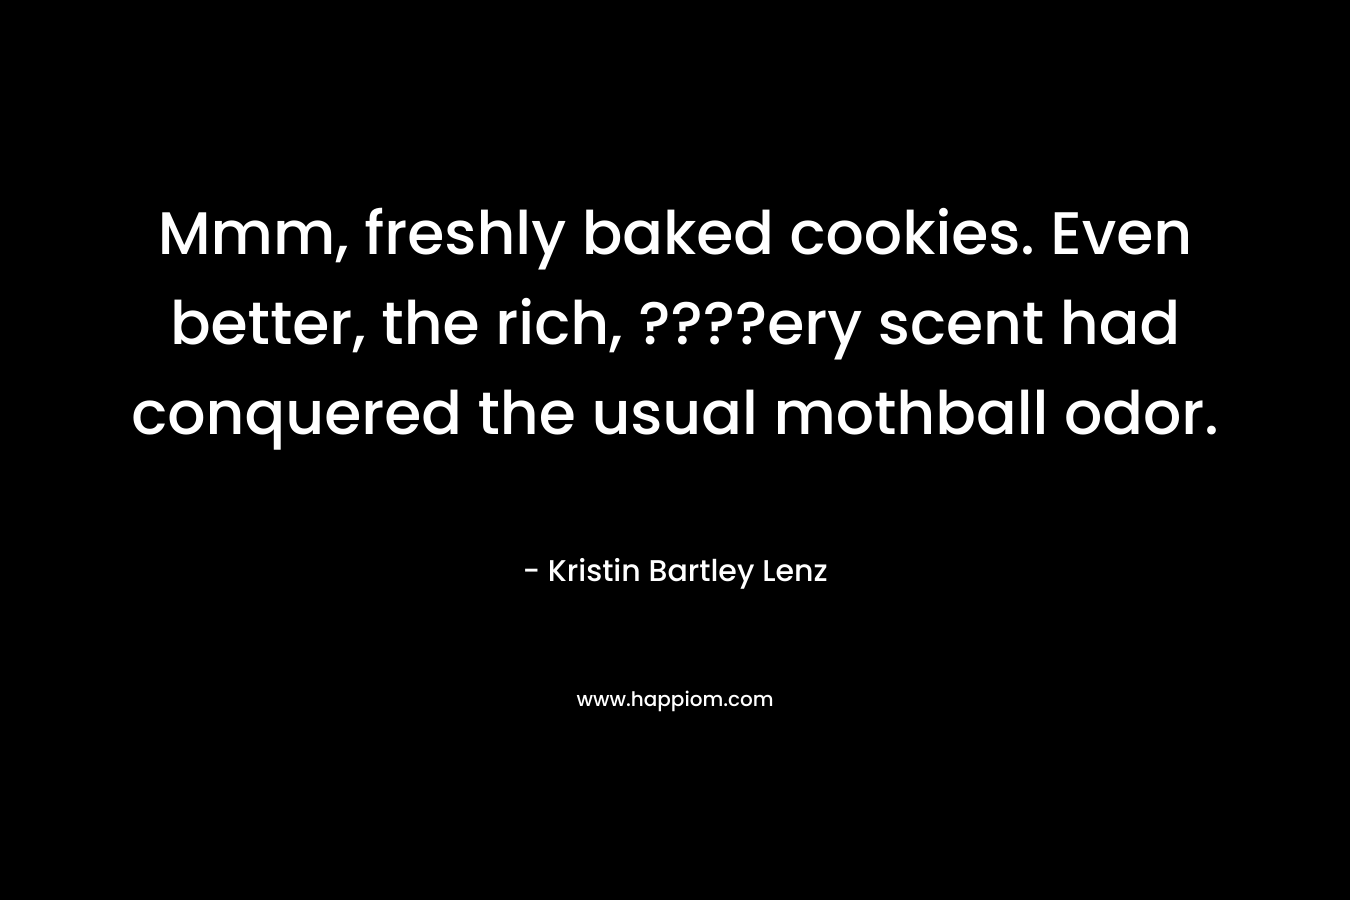 Mmm, freshly baked cookies. Even better, the rich, ????ery scent had conquered the usual mothball odor. – Kristin Bartley Lenz